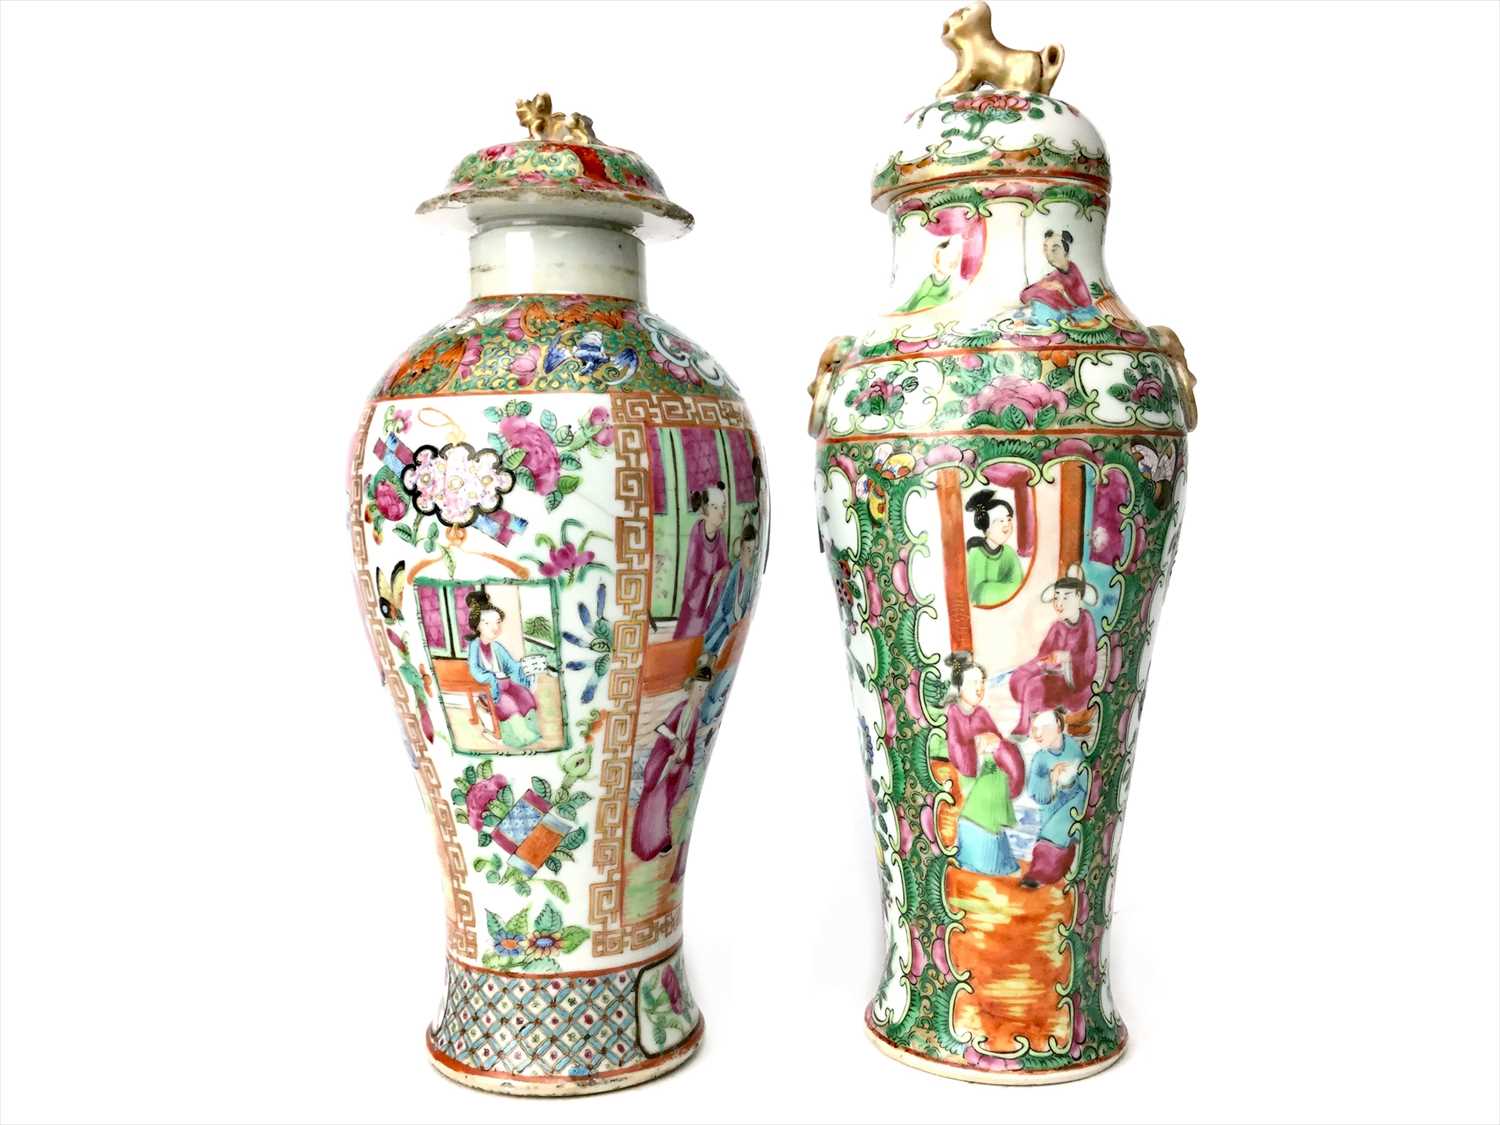 Lot 990 - AN EARLY 20TH CENTURY CHINESE FAMILLE ROSE LIDDED JAR